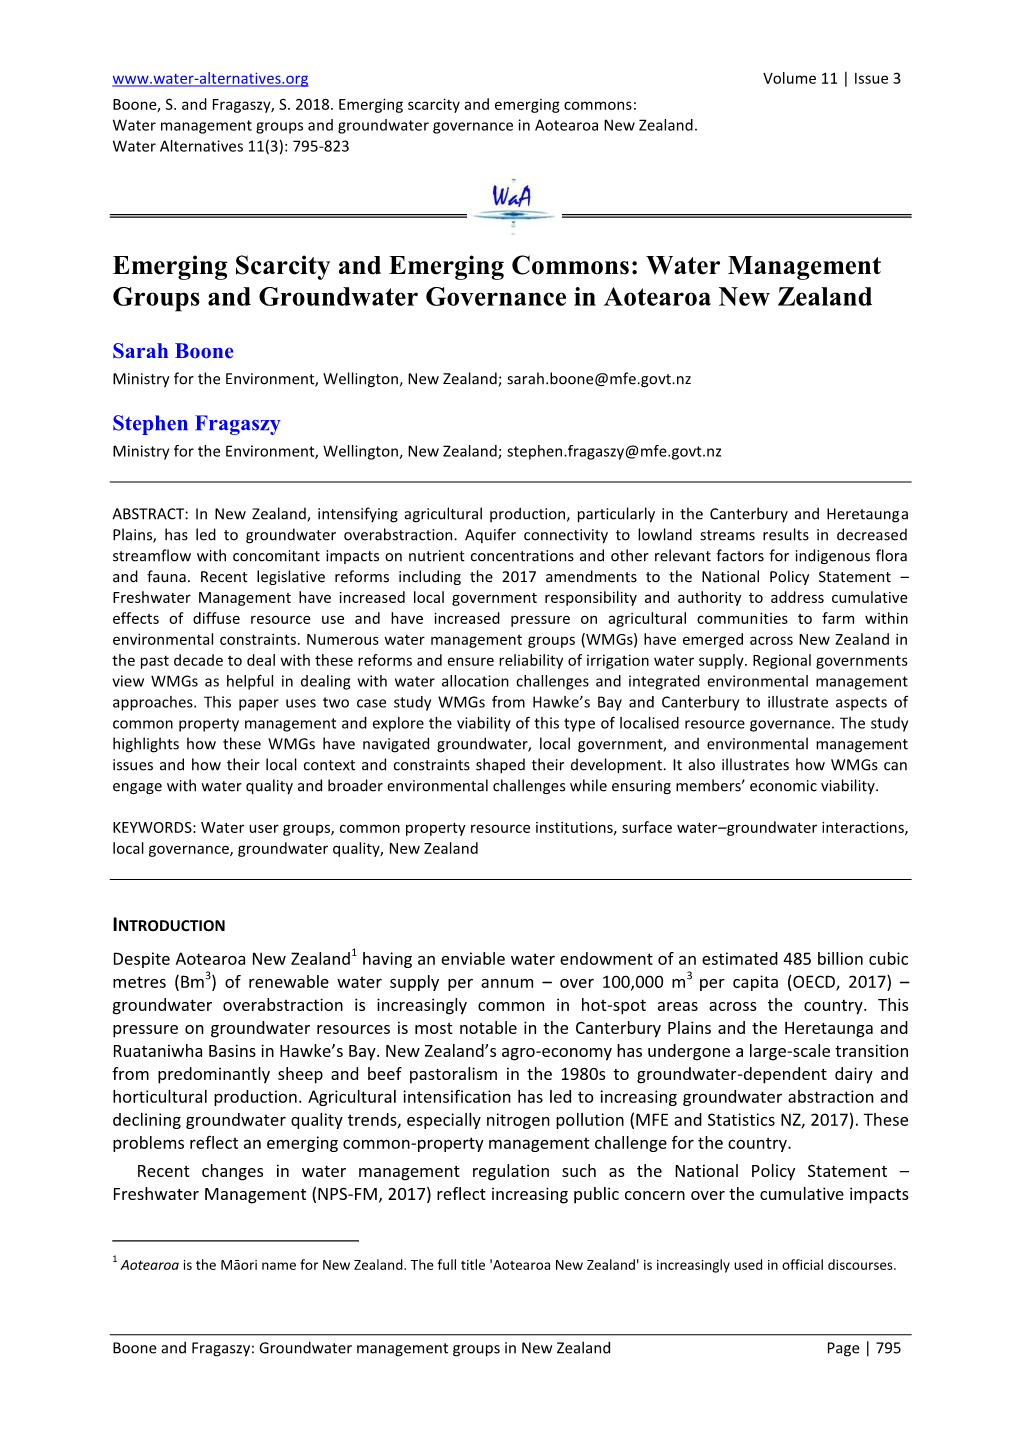 Water Management Groups and Groundwater Governance in Aotearoa New Zealand